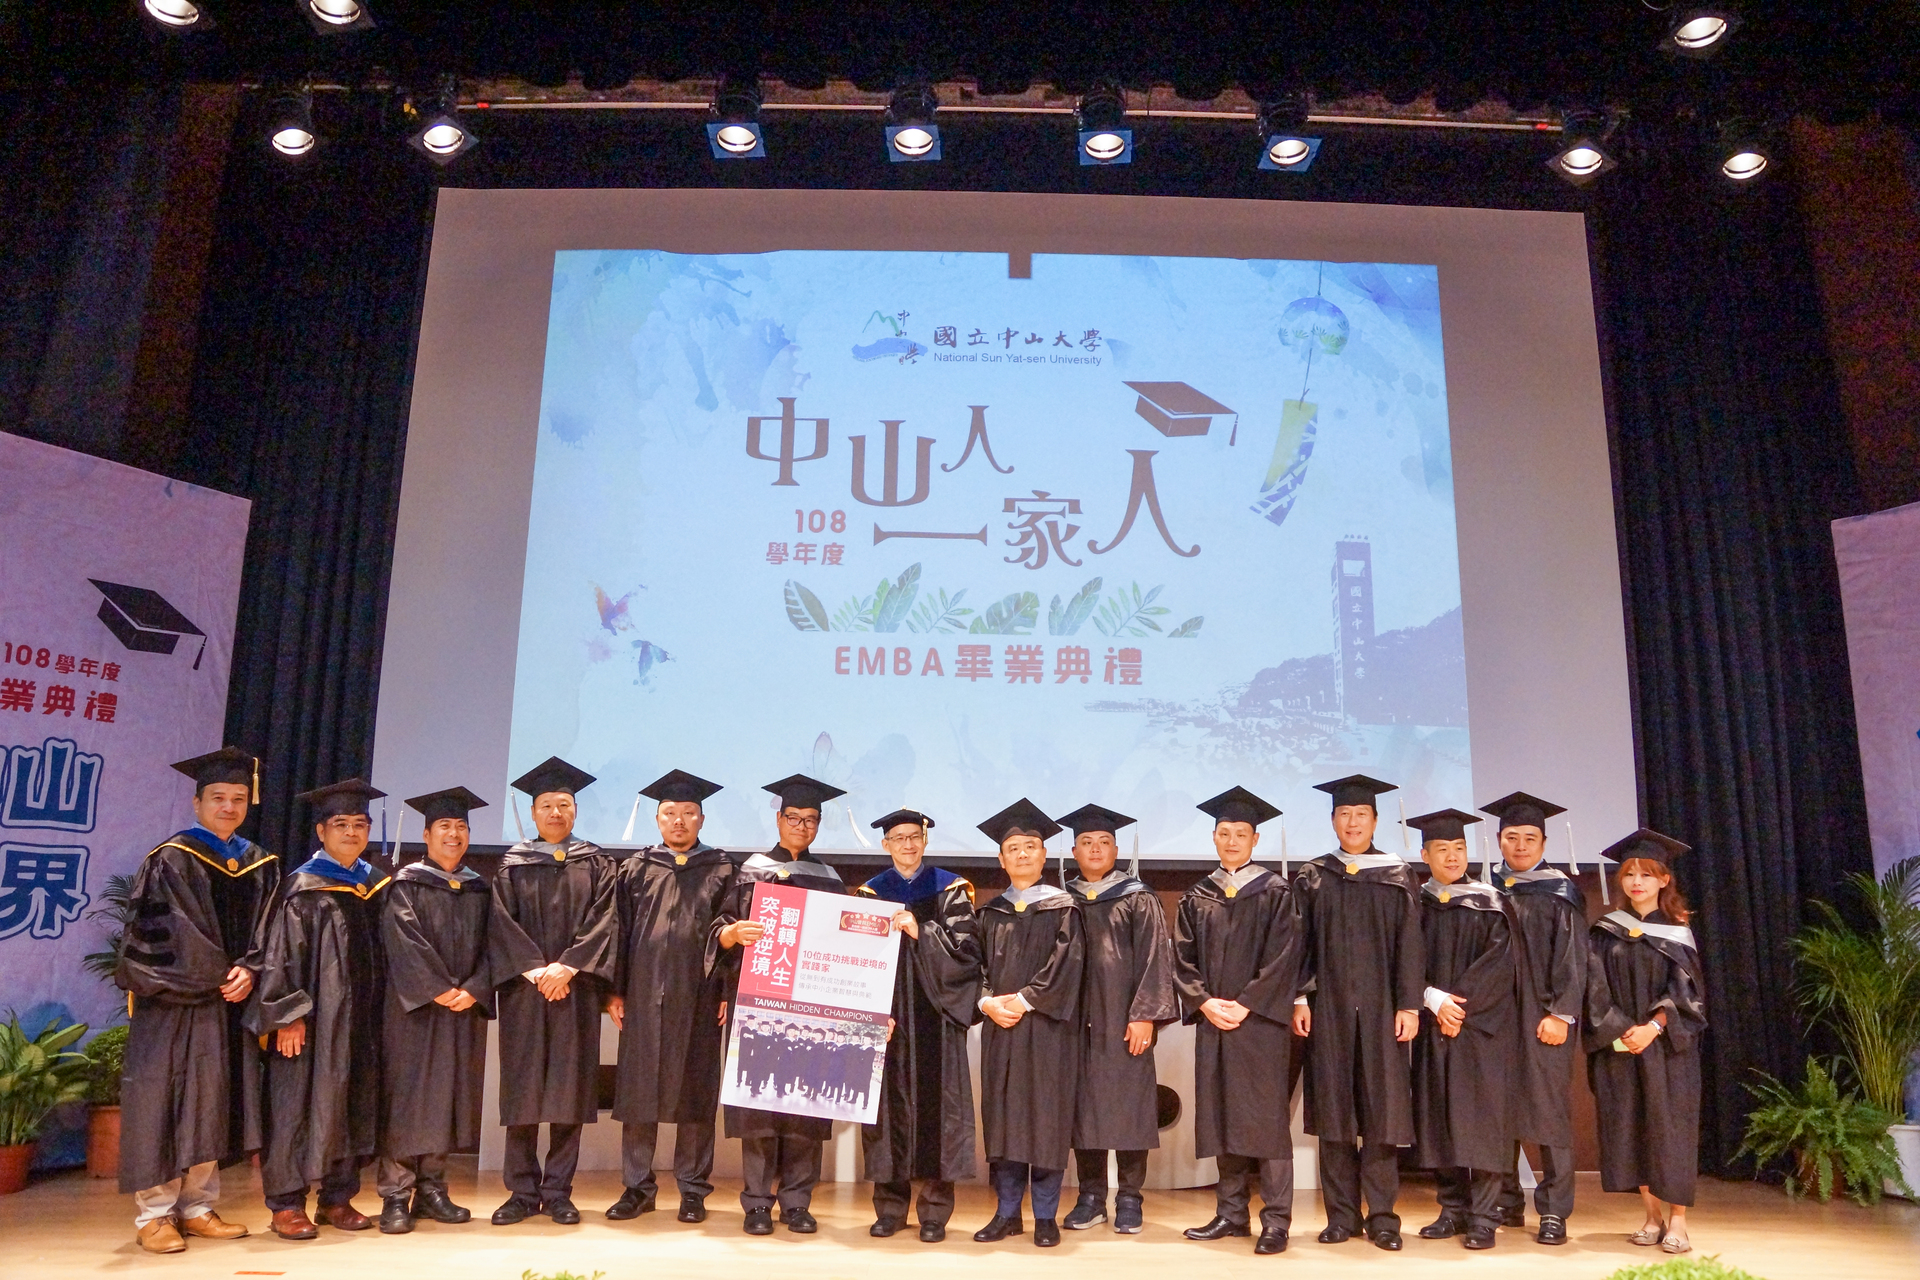 Ten entrepreneurs from the 20th Class published a book, 突破逆境，翻轉人生：10位成功挑戰逆境的實踐家(“Breakthrough Adversity and Turn Your Life Around: 10 Practitioners Who Successfully Overcame Adversity”), which not only shares the courageous experiences and wisdom of the entrepreneurs who broke through adversity, but also shows an extension of the spirit and characteristics of NSYSU’s EMBA.